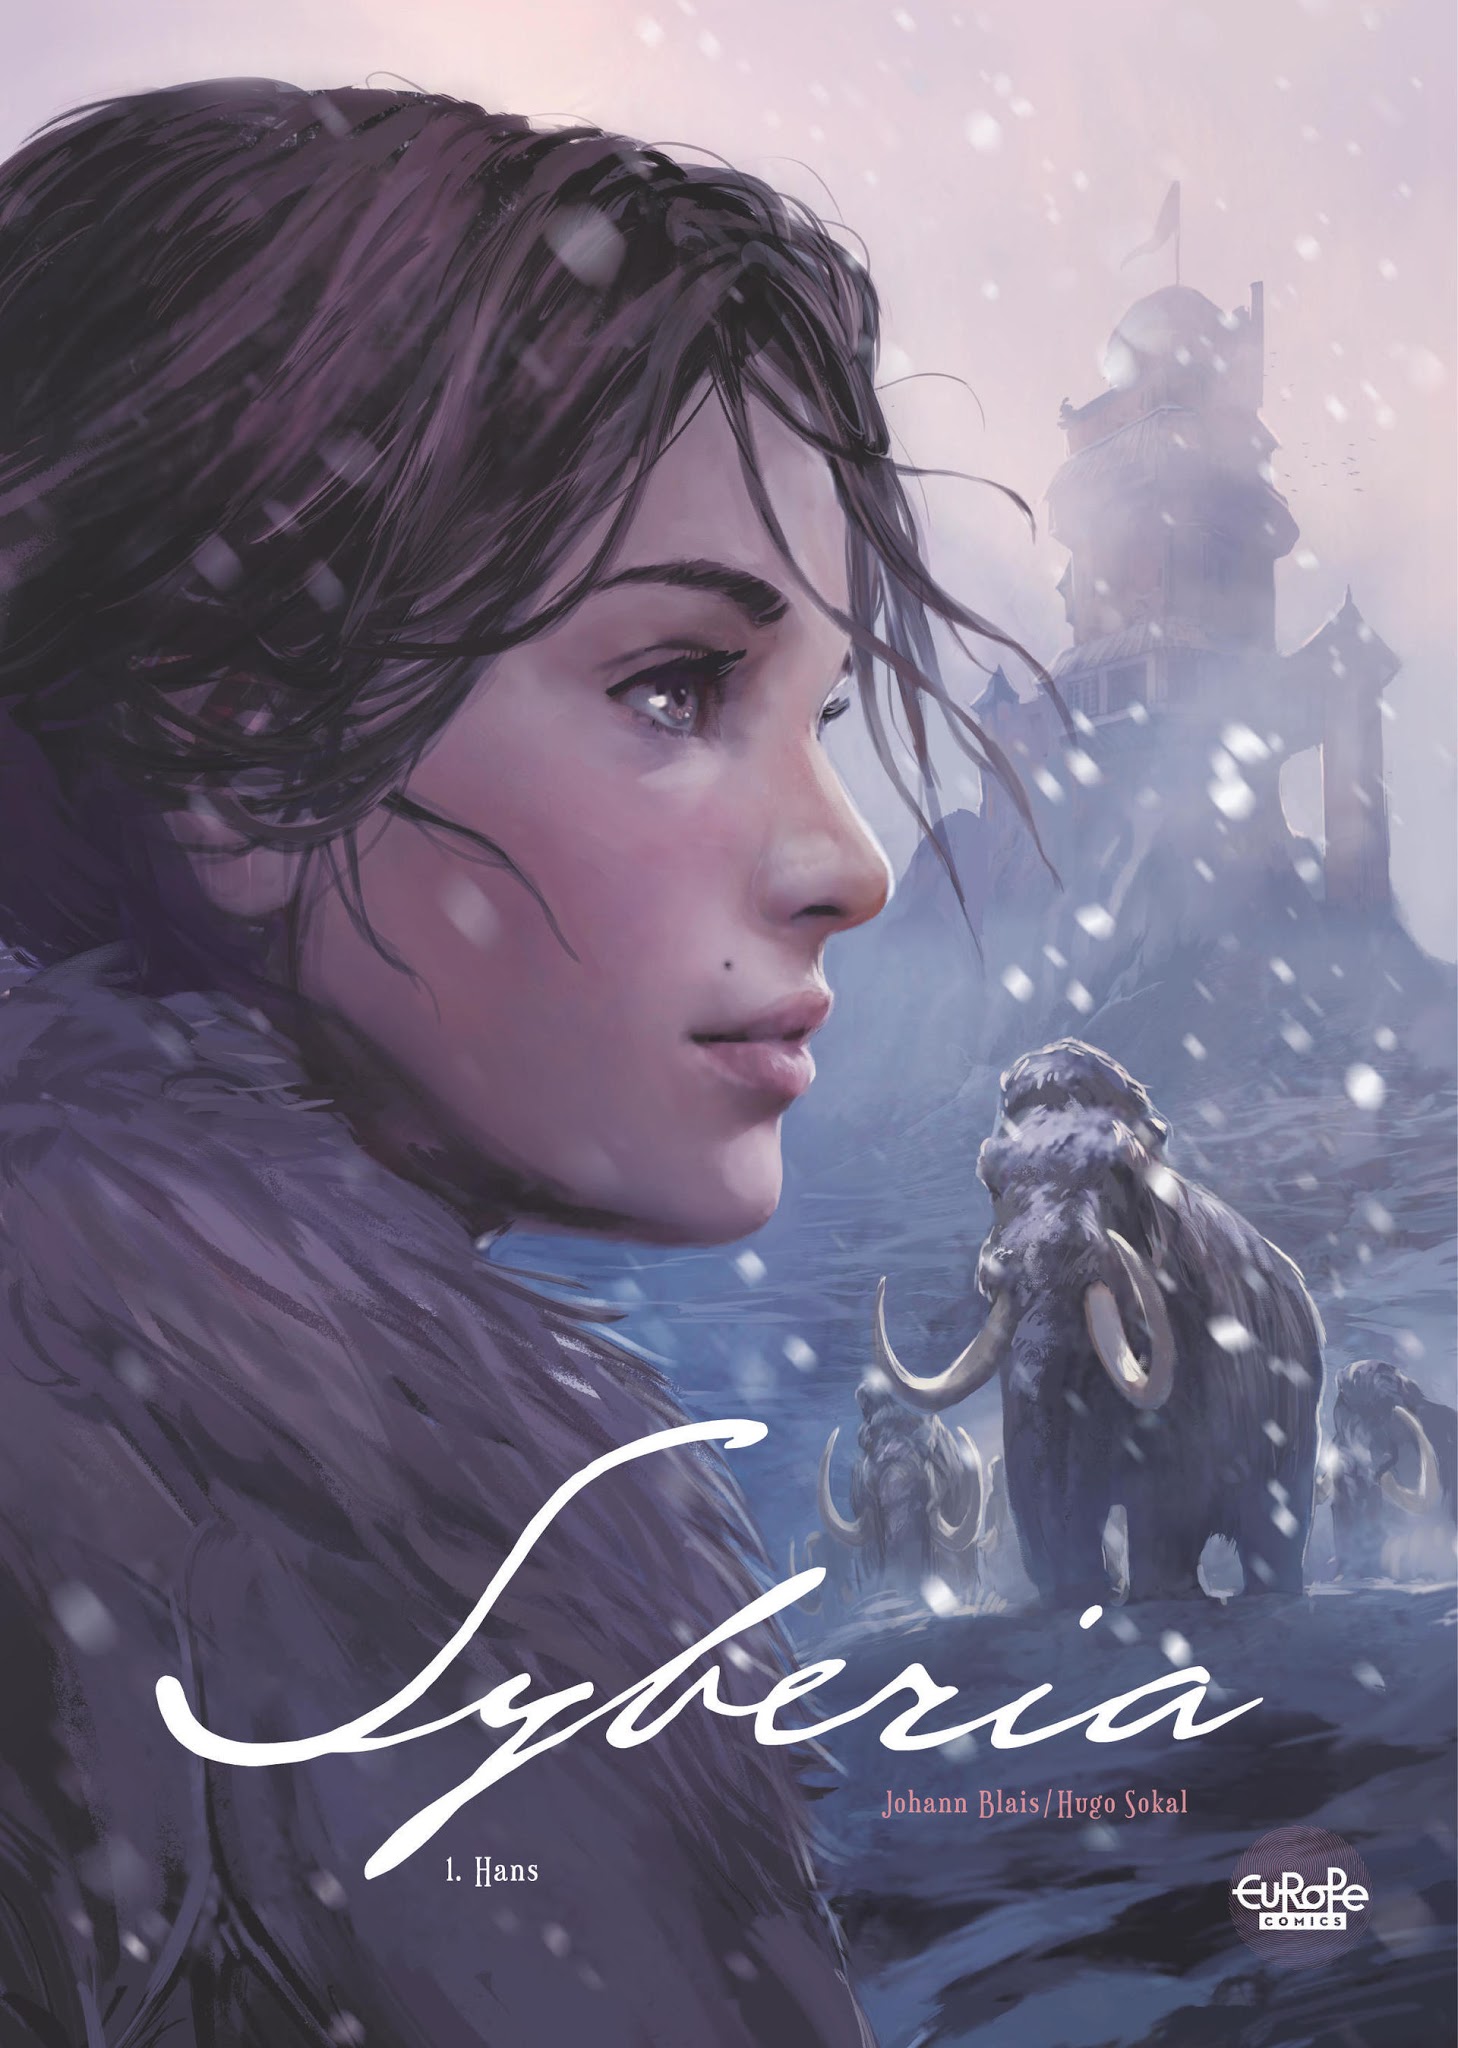 Read online Syberia comic -  Issue #1 - 1